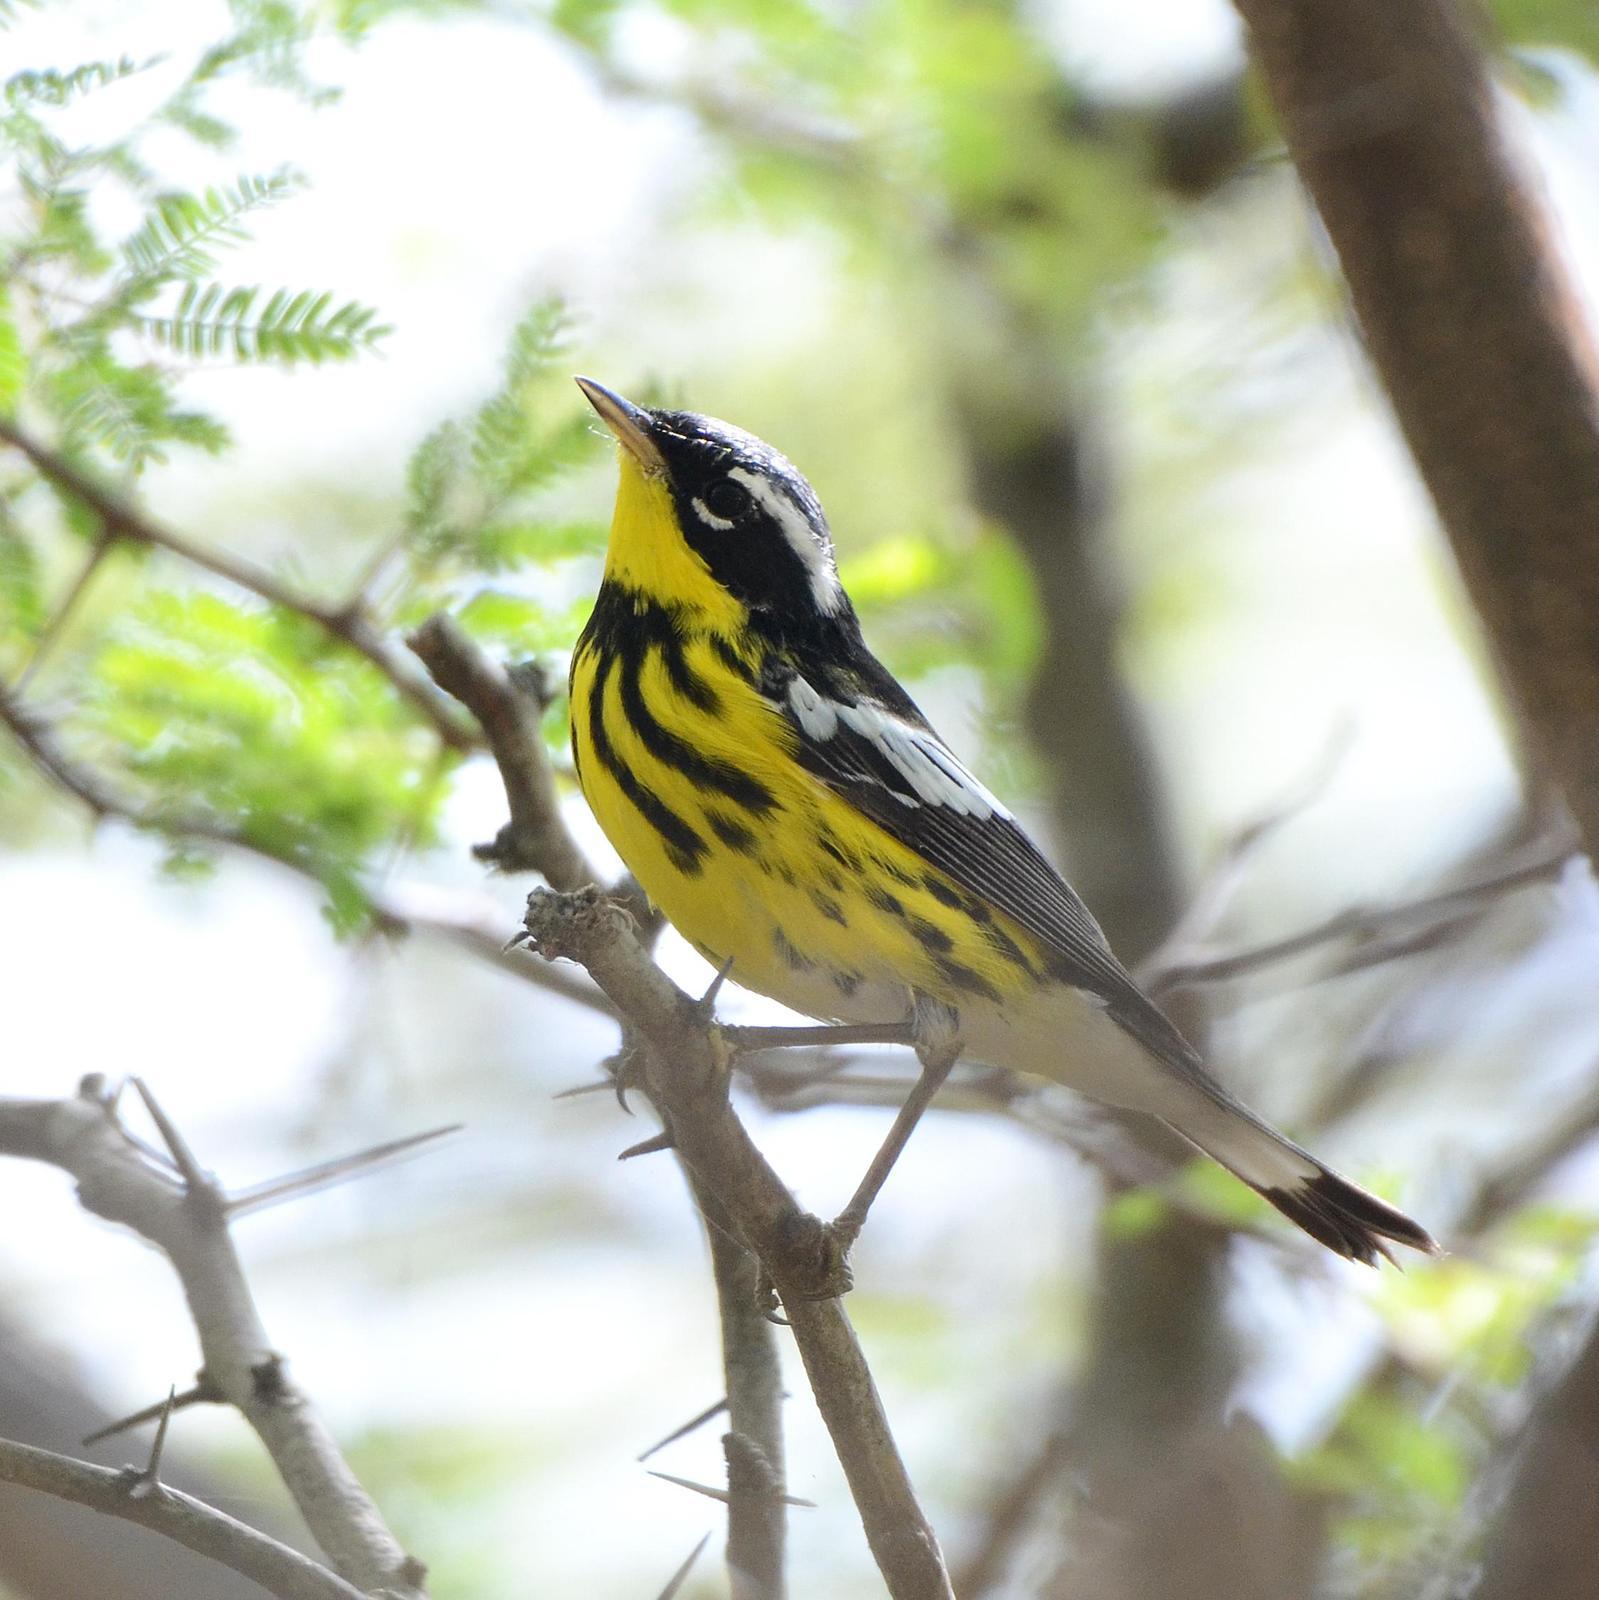 Magnolia Warbler Photo by Steven Mlodinow